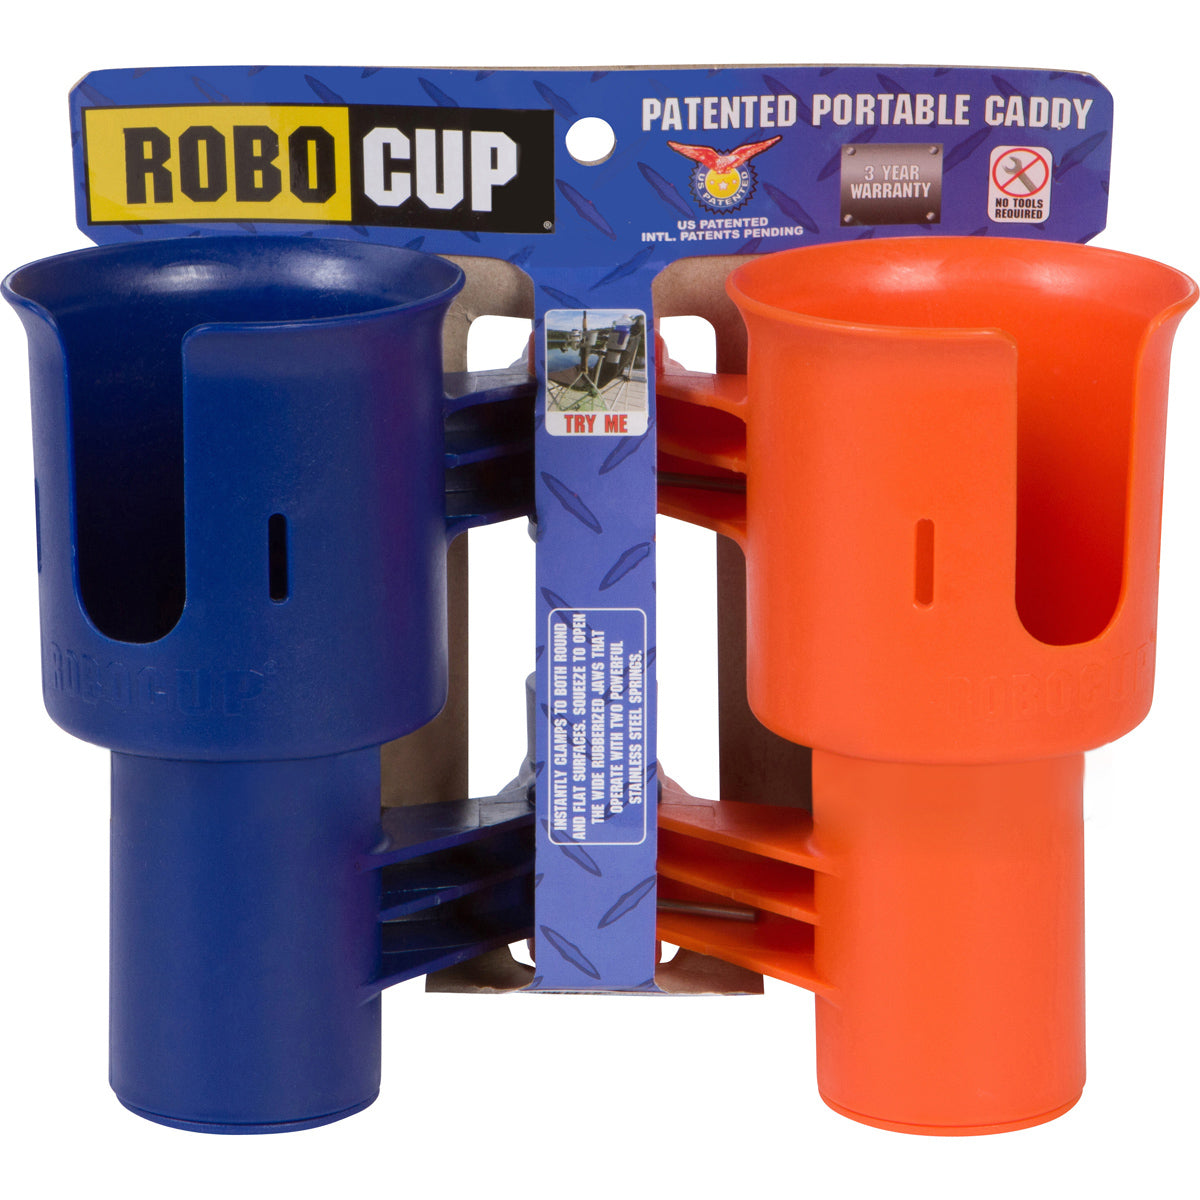 ROBOCUP Best Cup Holder for Drinks, Fishing Rod/Pole, Boat, Beach